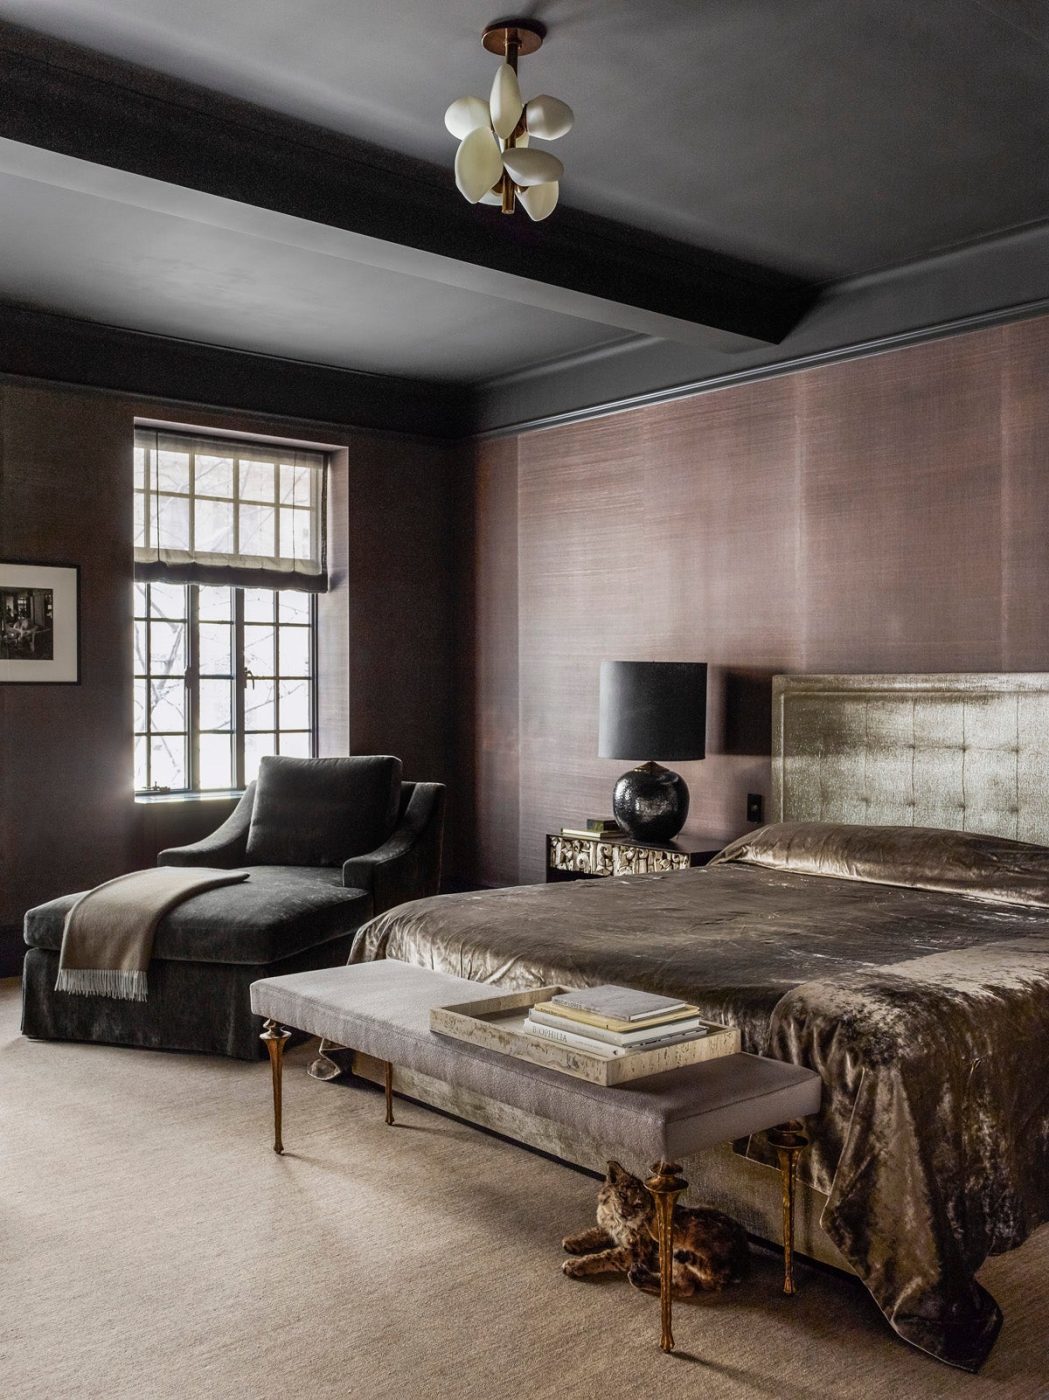 Glamorous bedroom designed by MR Architecture + Decor